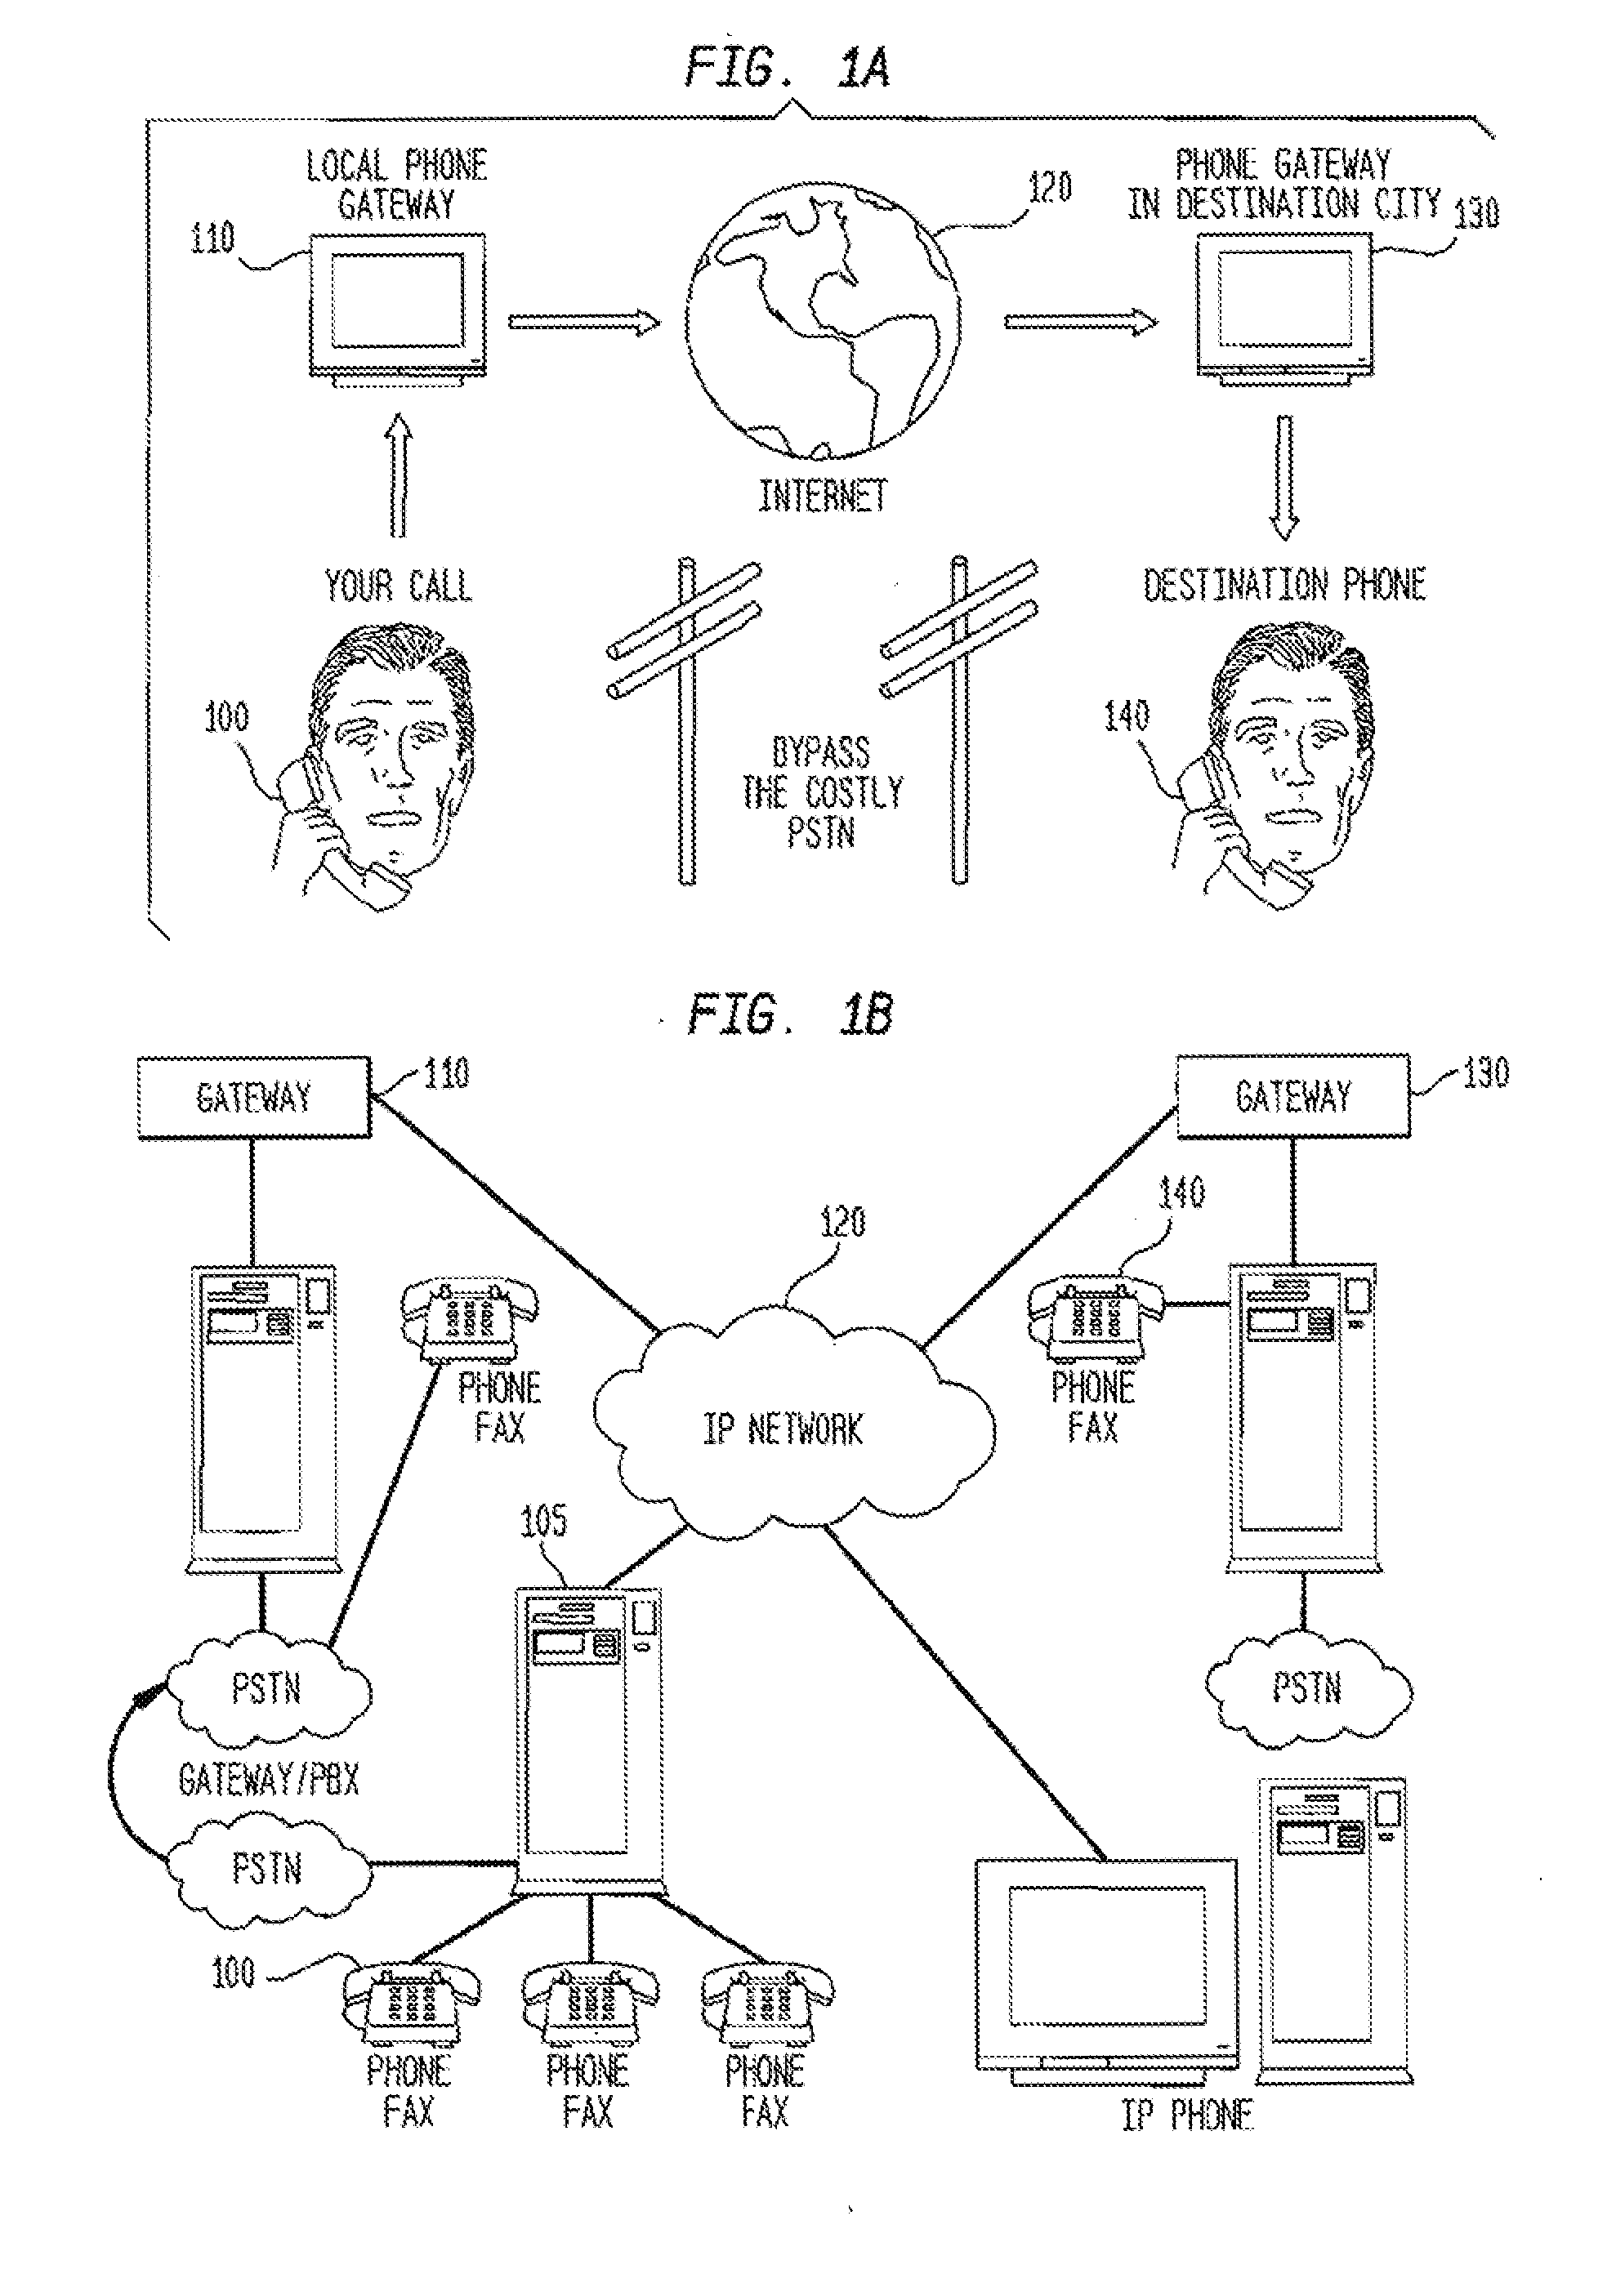 Method, System, and Computer Program Product for Managing Routing Servers and Services